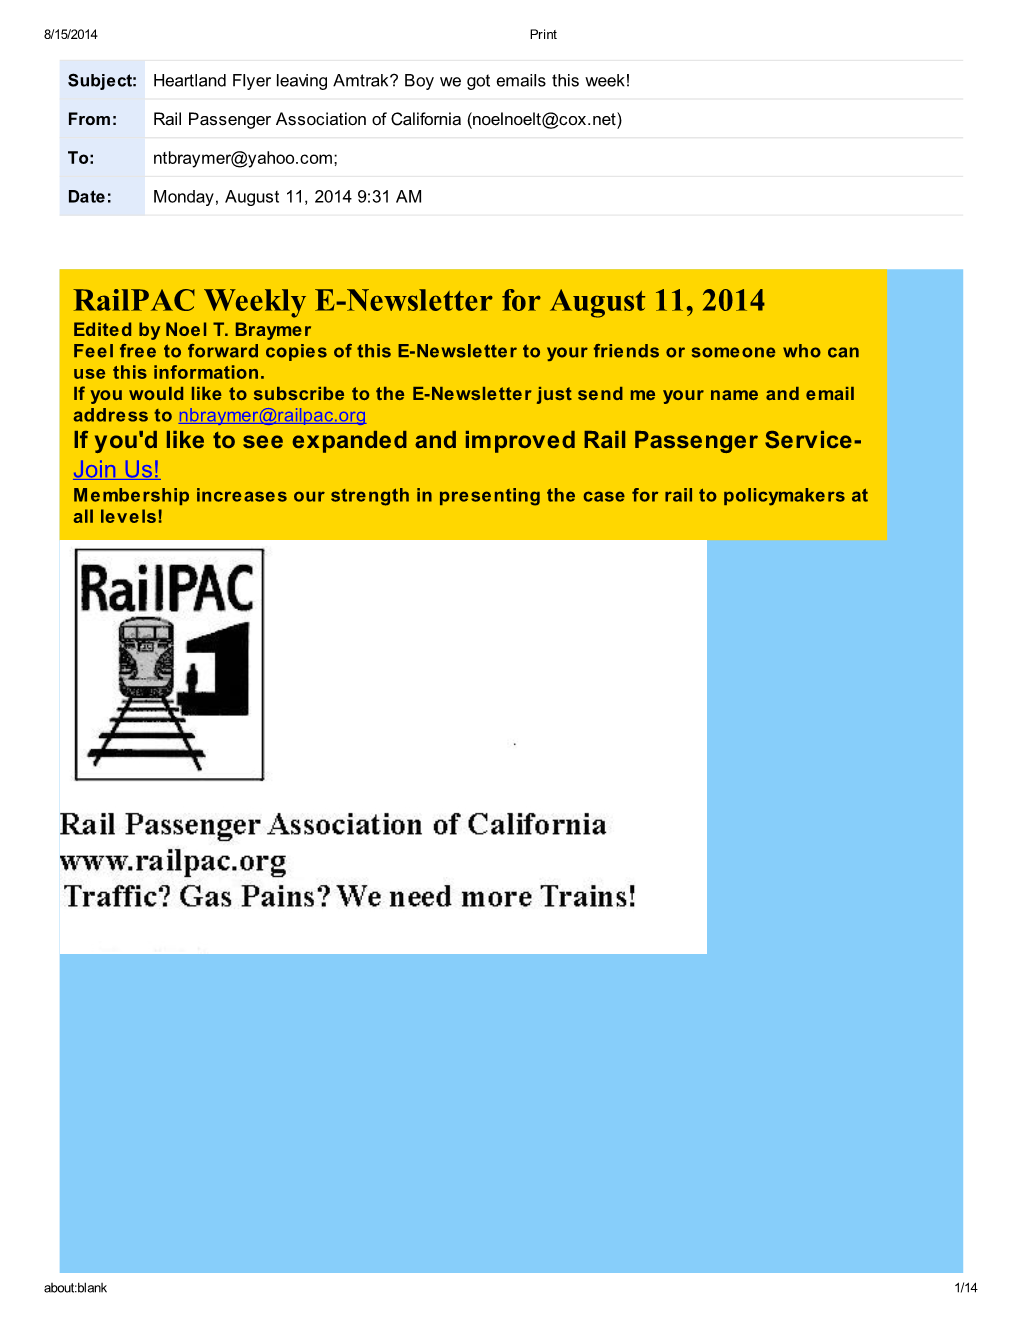 Railpac Weekly E-Newsletter for August 11, 2014 Edited by Noel T